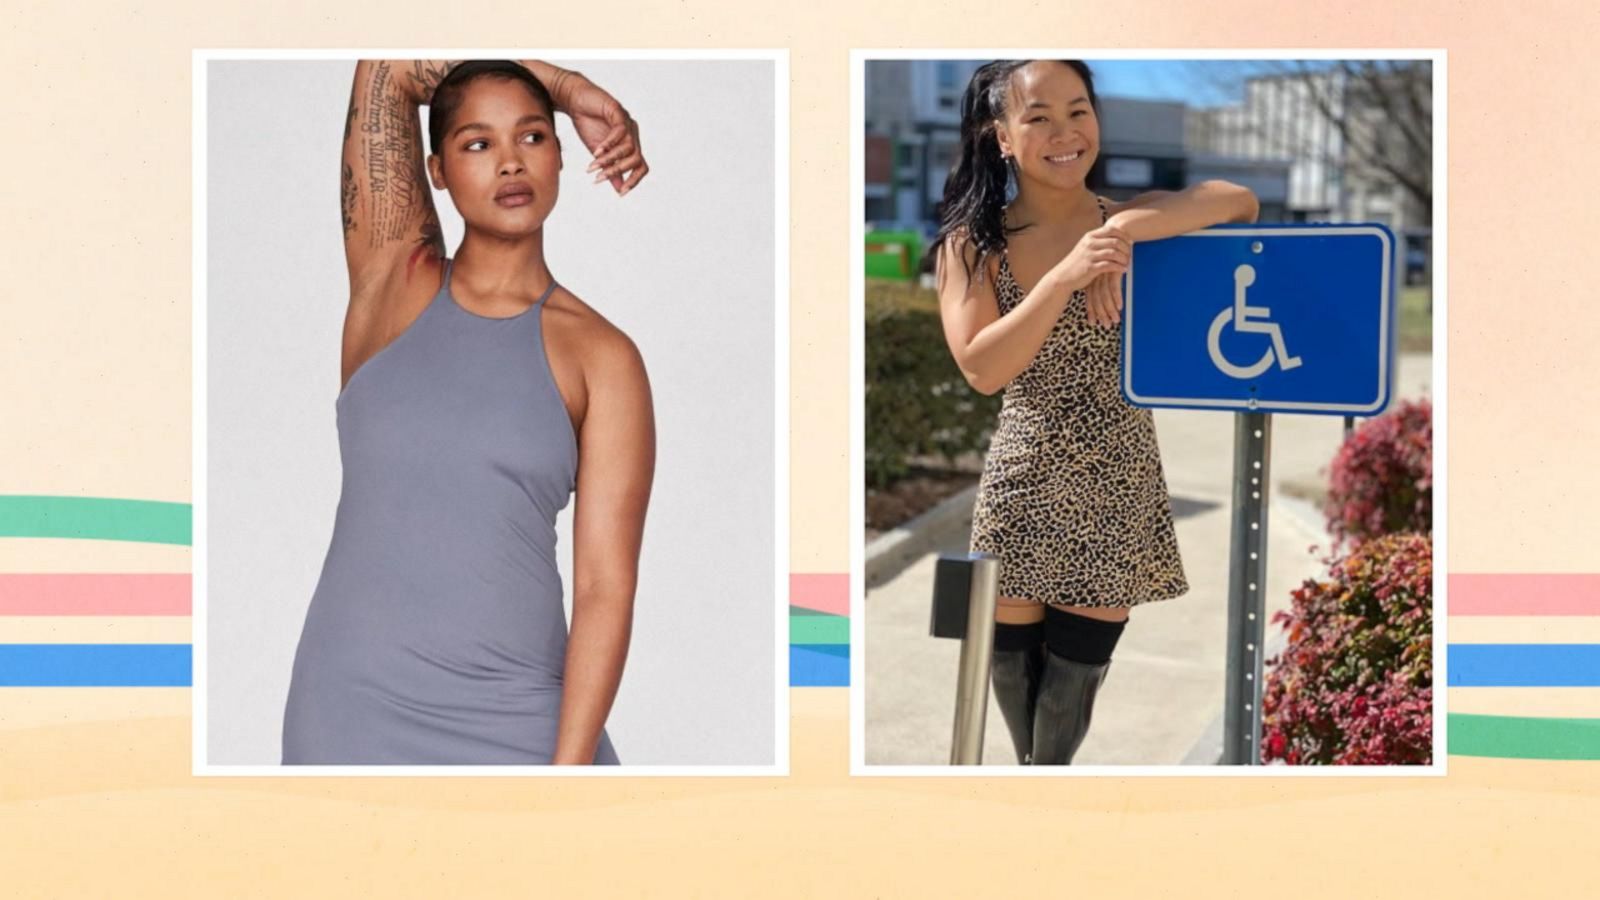 Are Exercise Dresses The Ultimate Everyday Outfit? How To Style Our New Fave